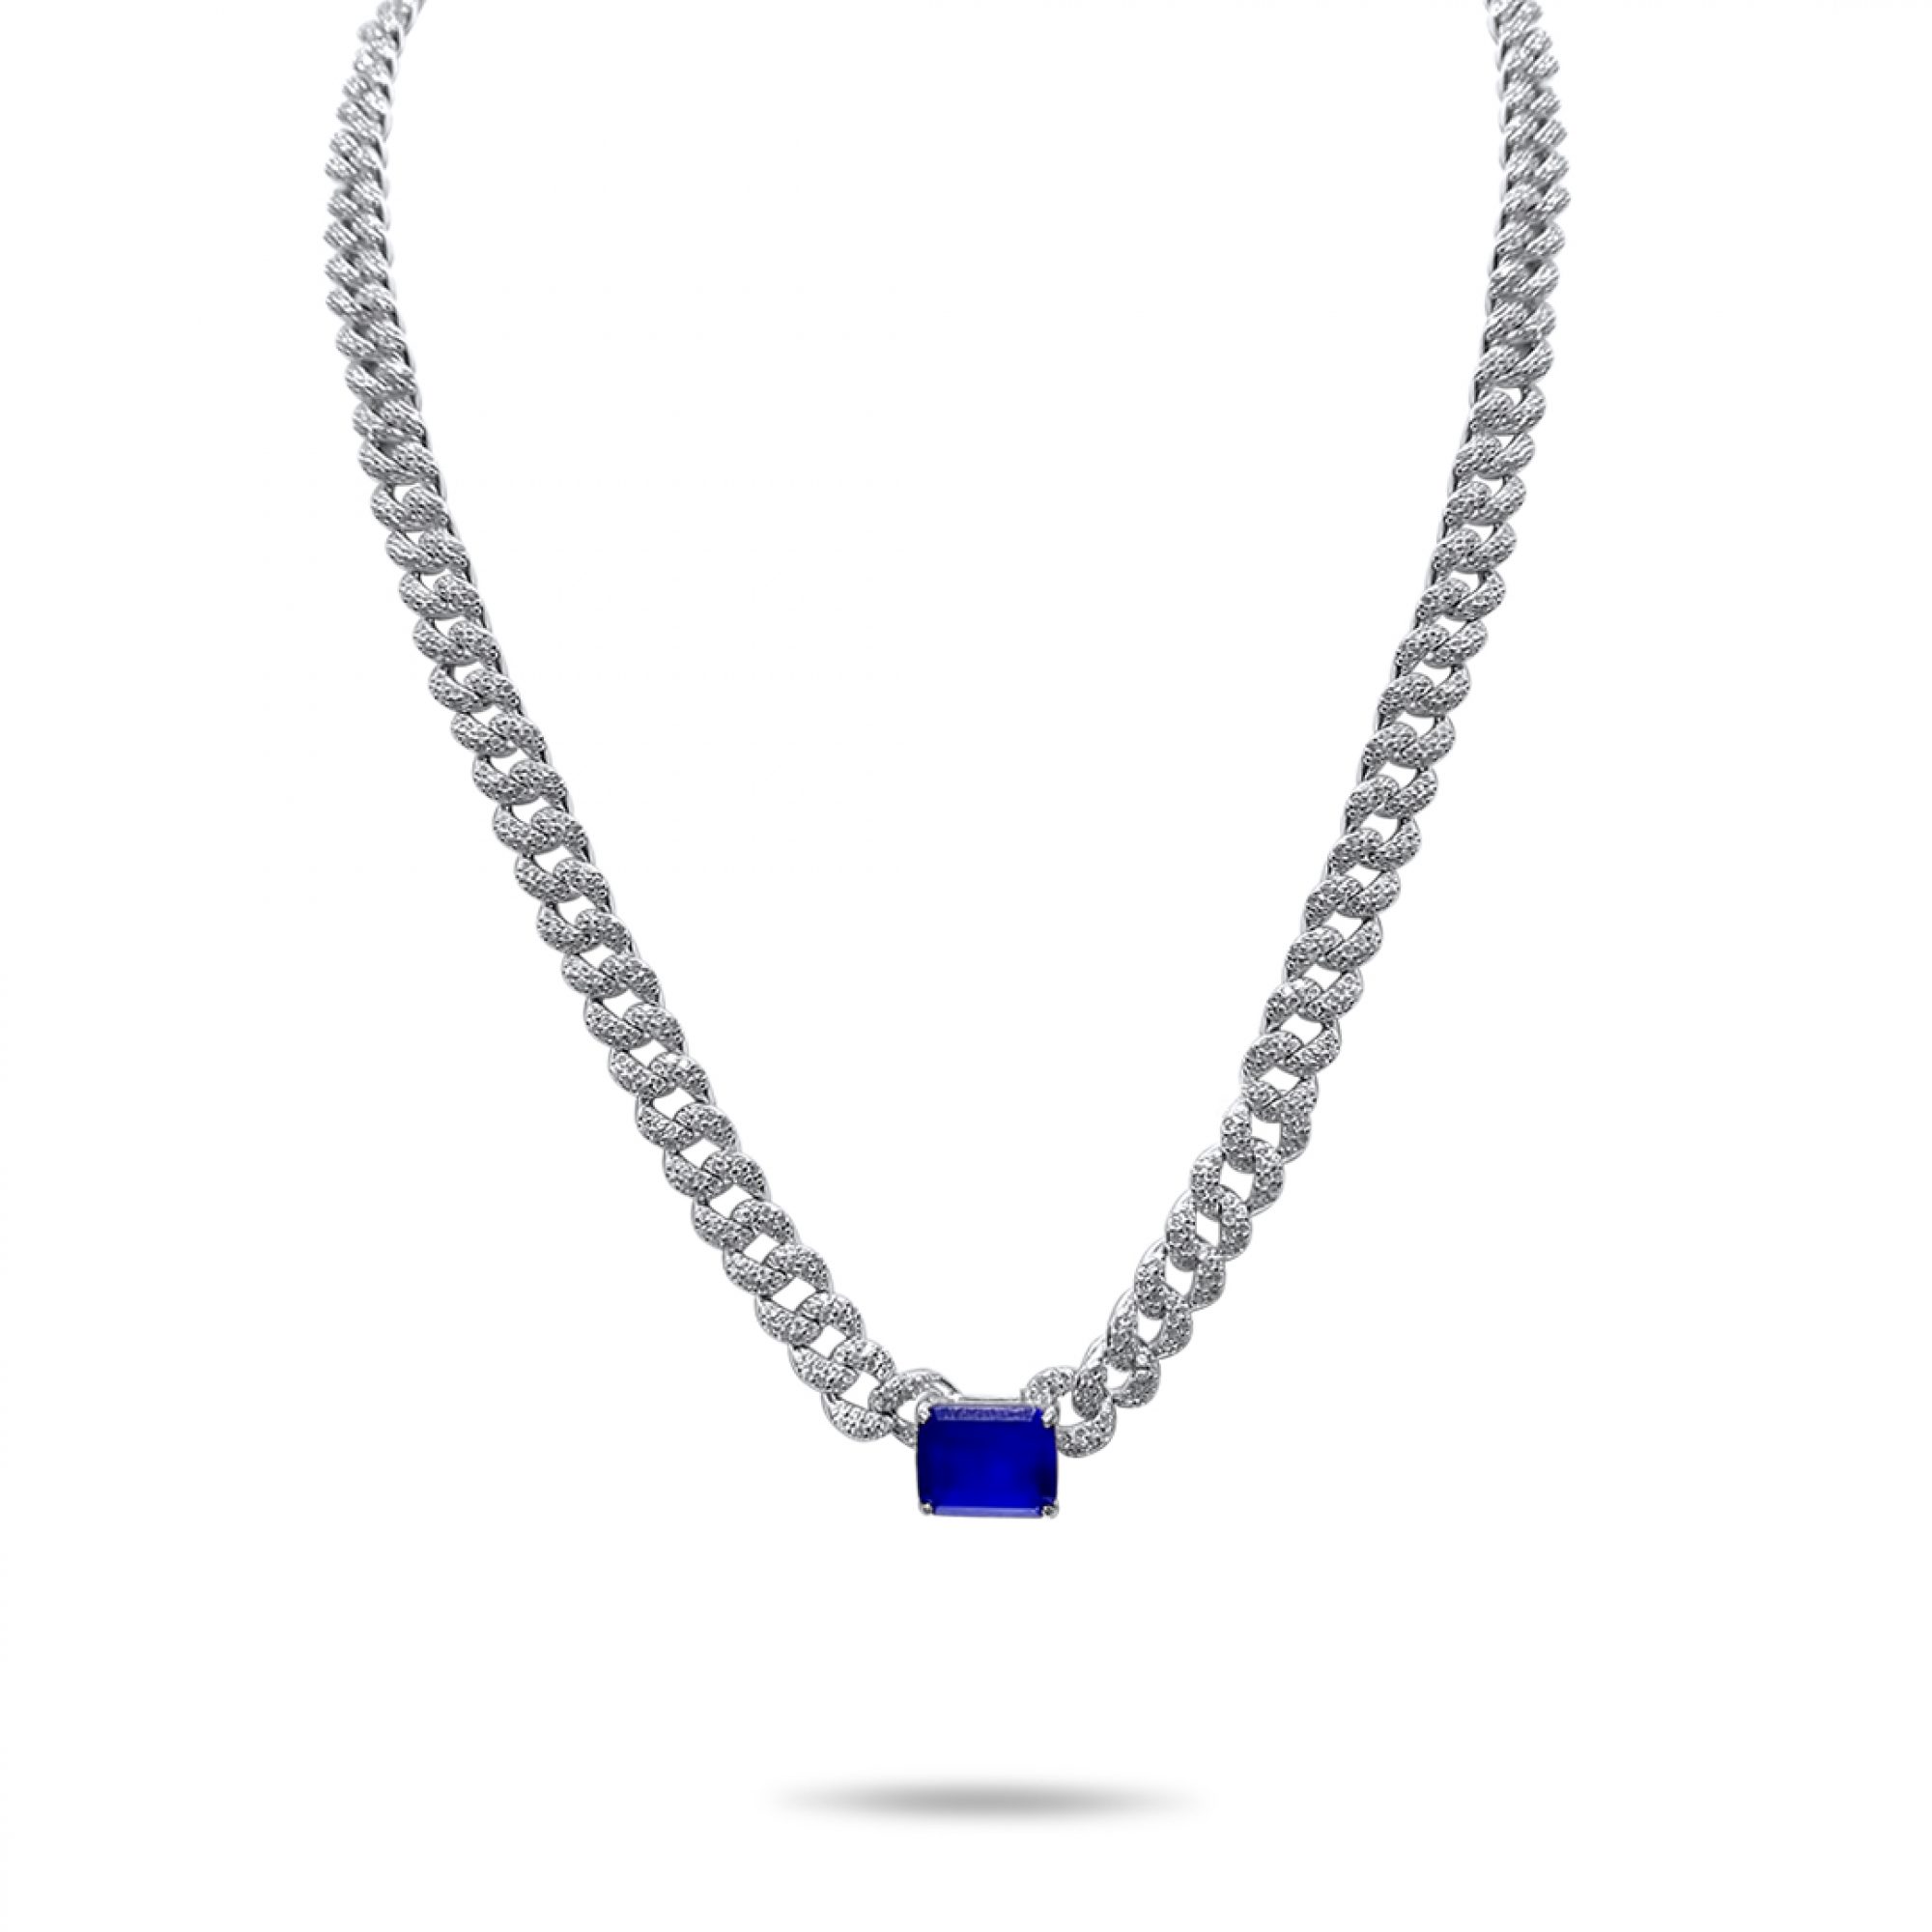 Silver chain with sapphire and zircon stones